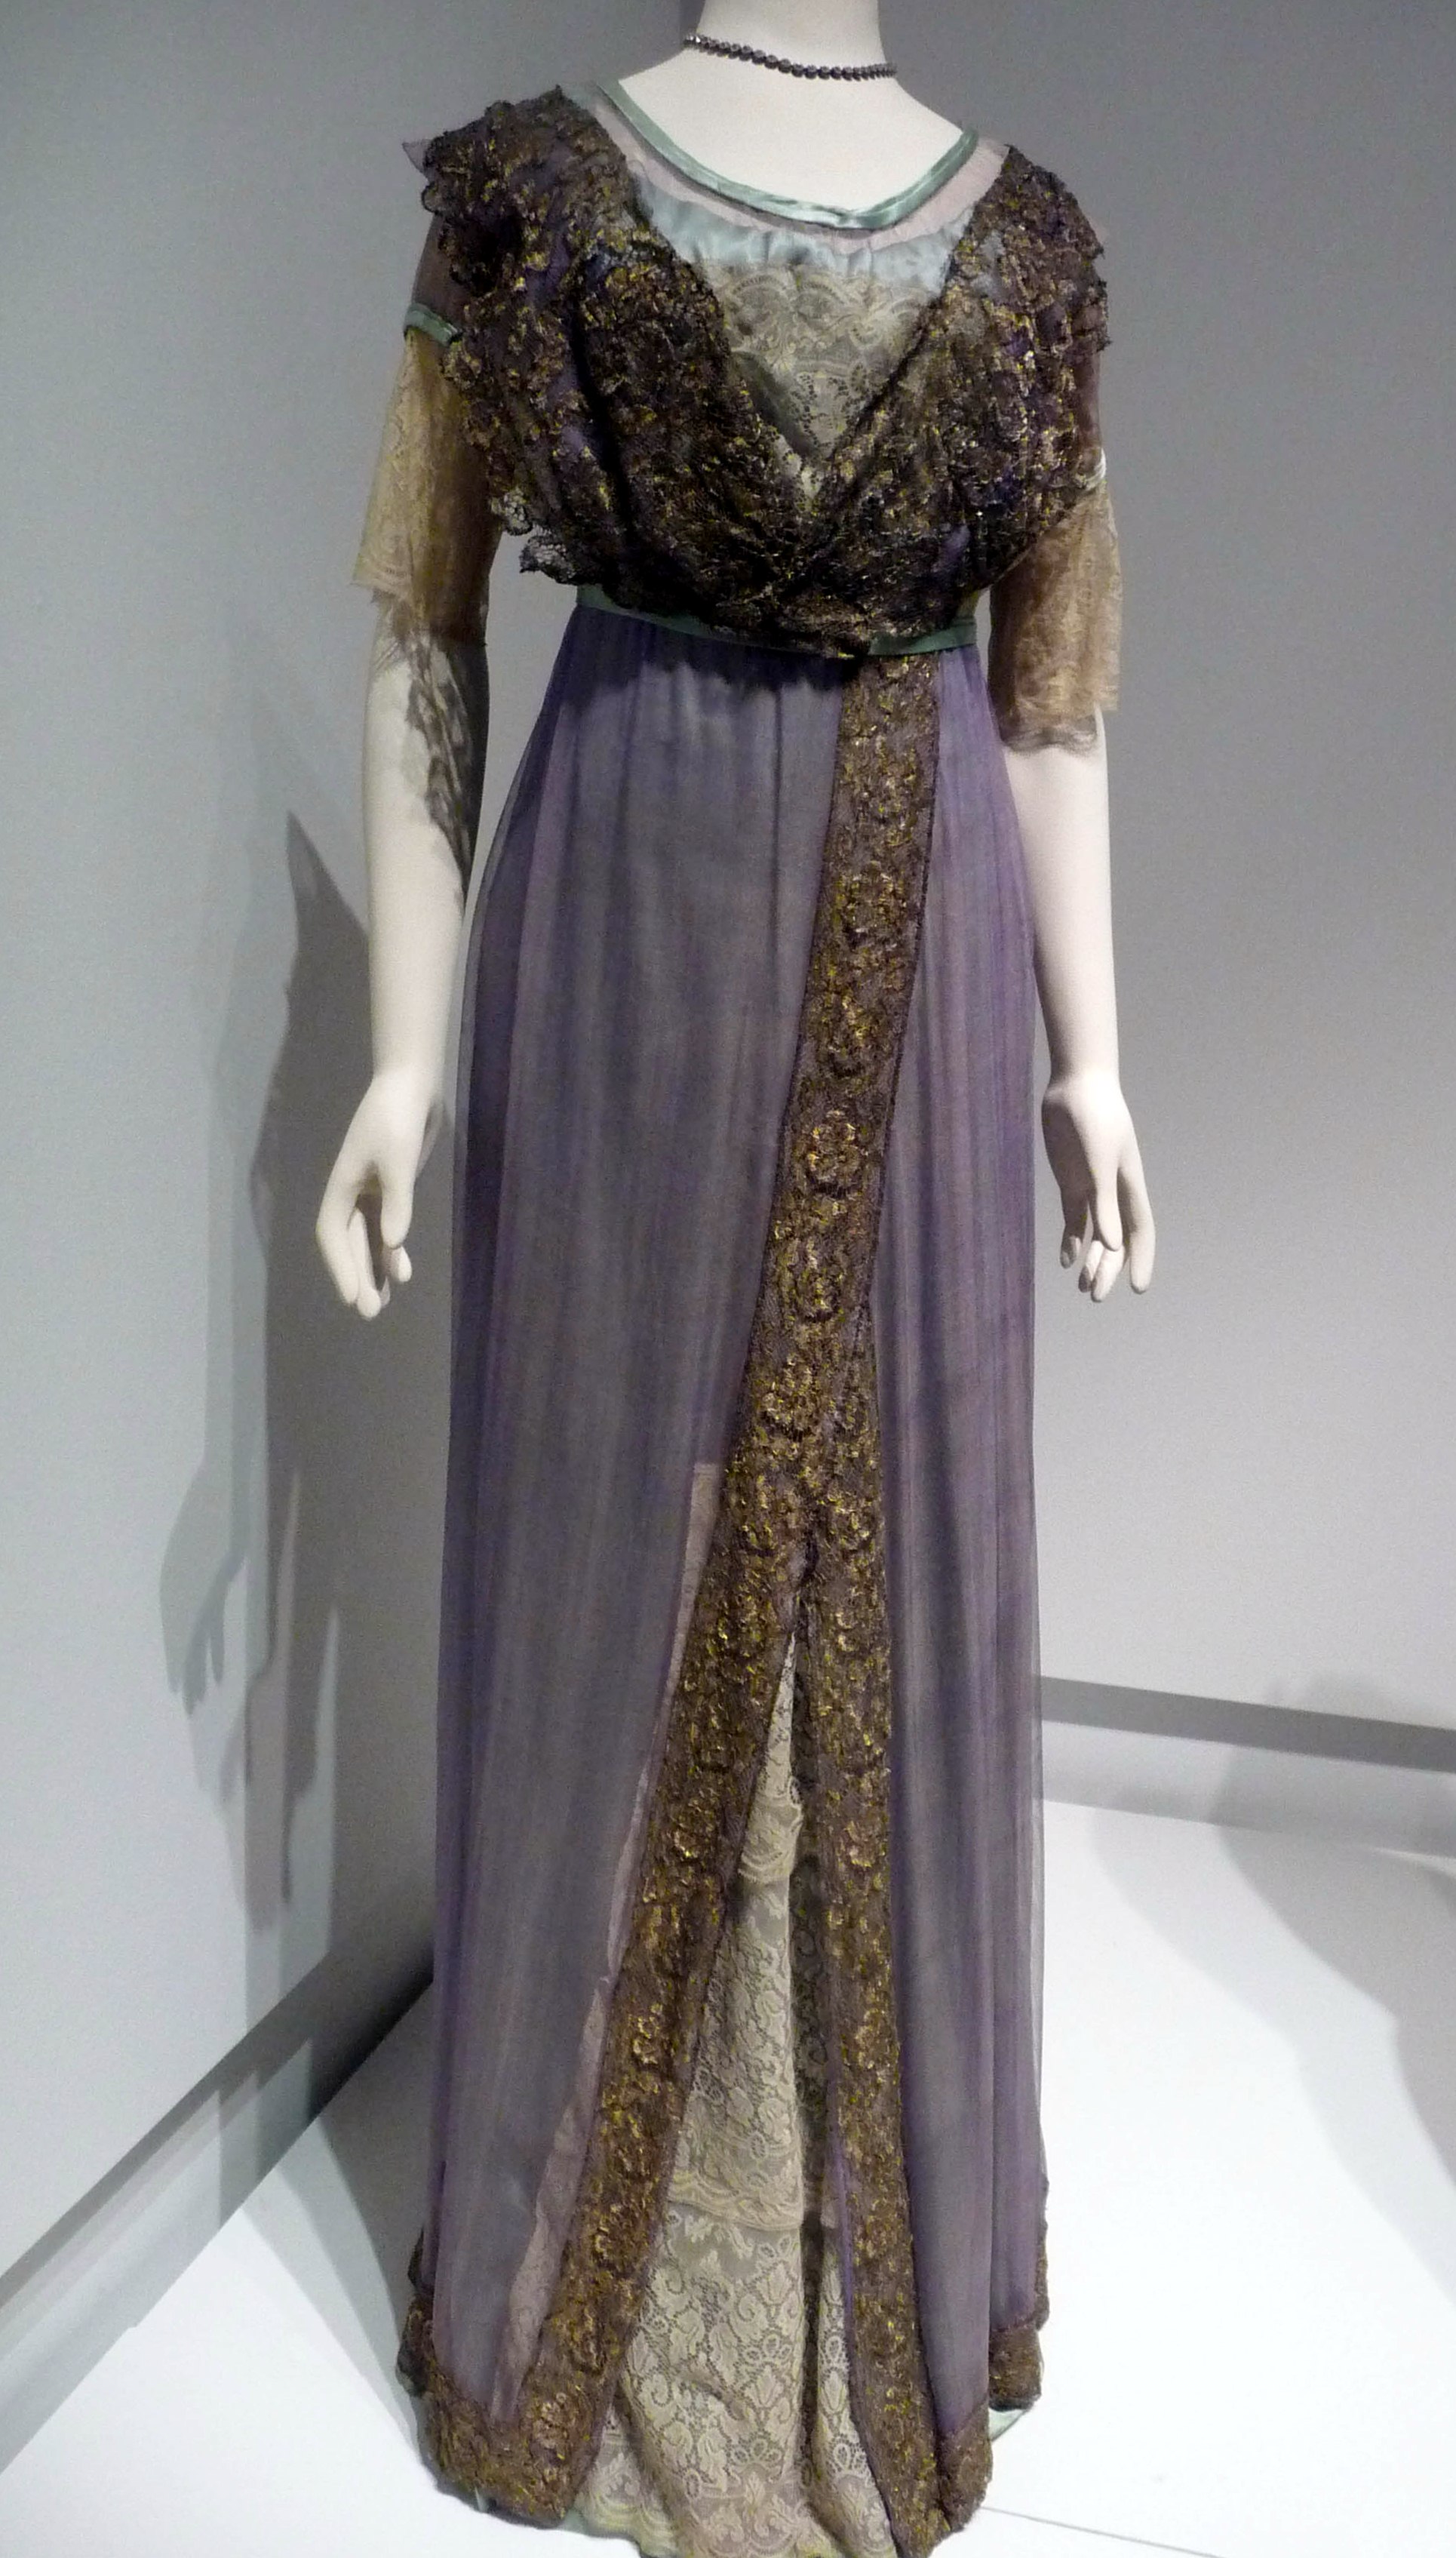 EVENING DRESS WITH TRAIN, silk satin, marquisette net and machine-made lace, trimmed with gold metallic lace, made by T&S Bacon, Liverpool, 1911-13.